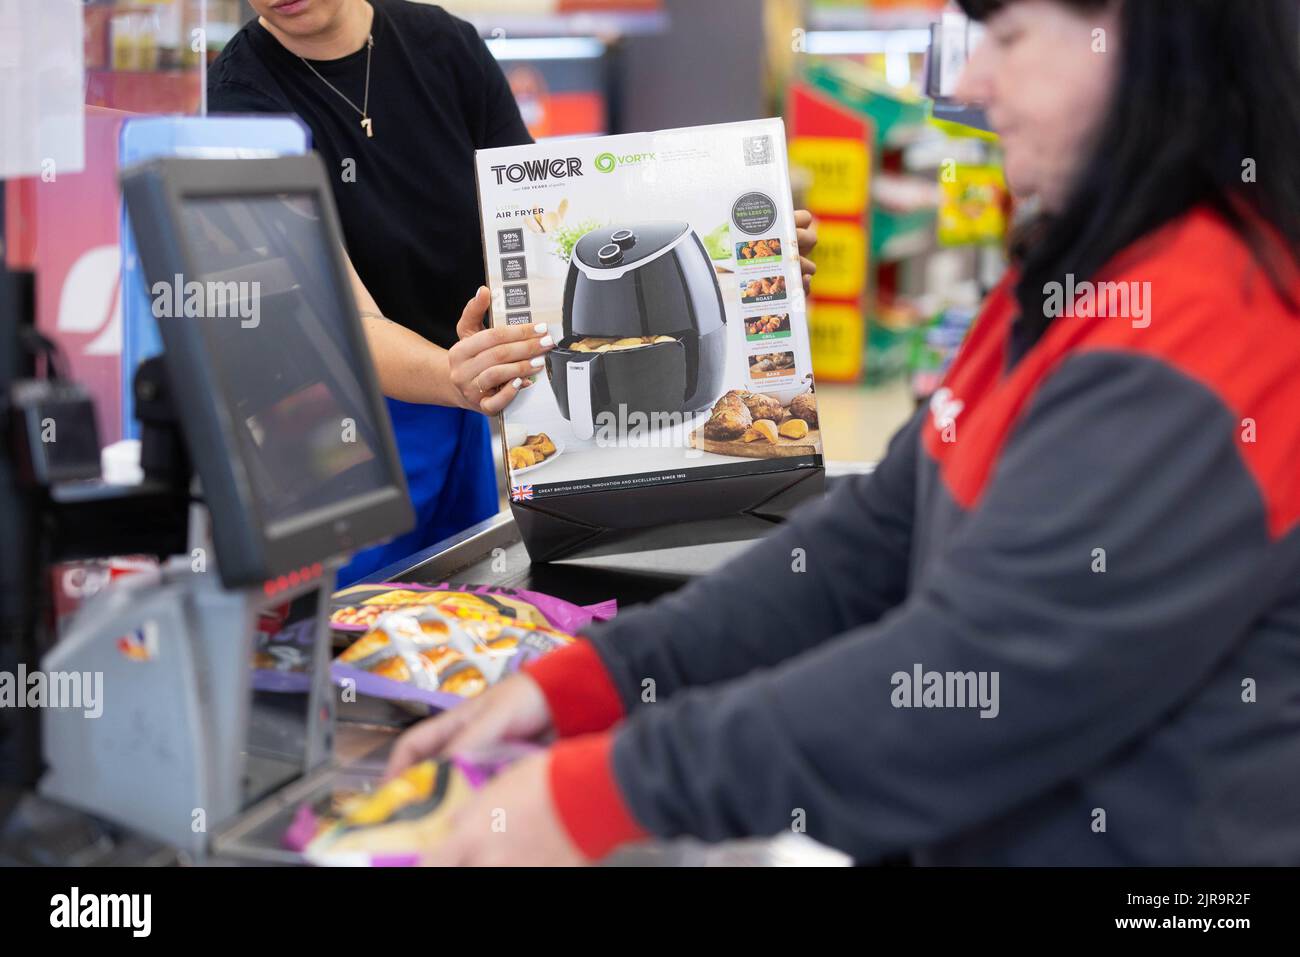 EDITORIAL USE ONLY An energy efficient air fryer is purchased as Iceland and Utilita unveil the 'Shop Smart, Cook Savvy' initiative, aiming to help bring down the cost to cook during the cost-of-living crisis. Picture date: Tuesday September 23, 2022. Stock Photo